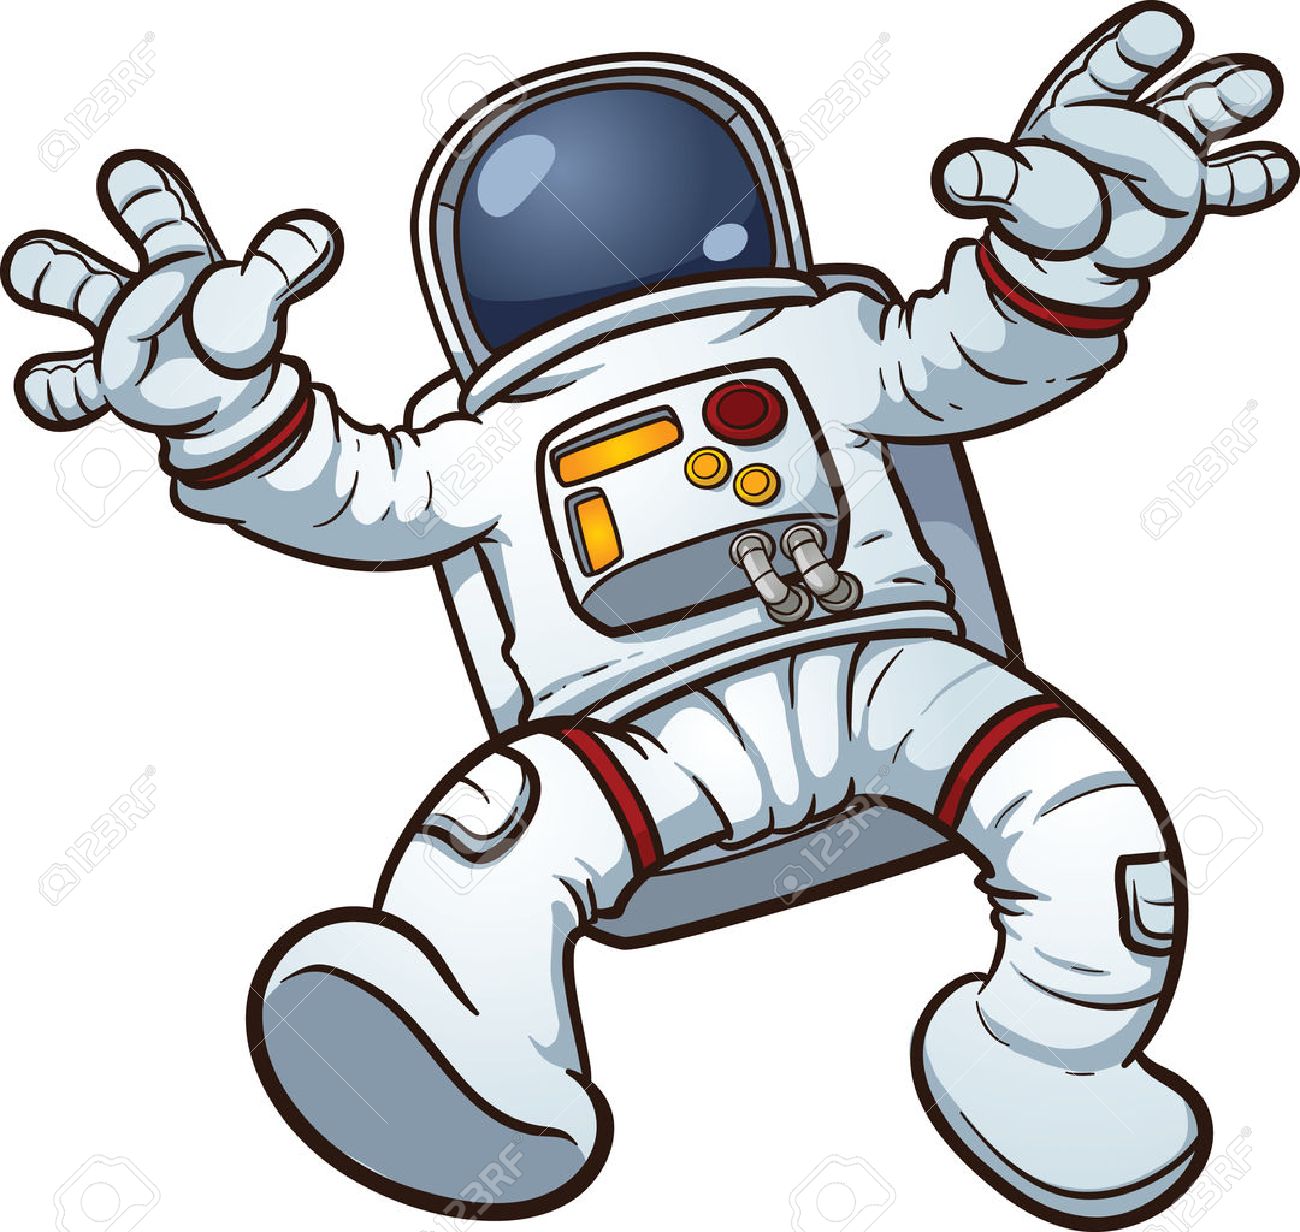 The best free Astronaut clipart images. Download from 143.